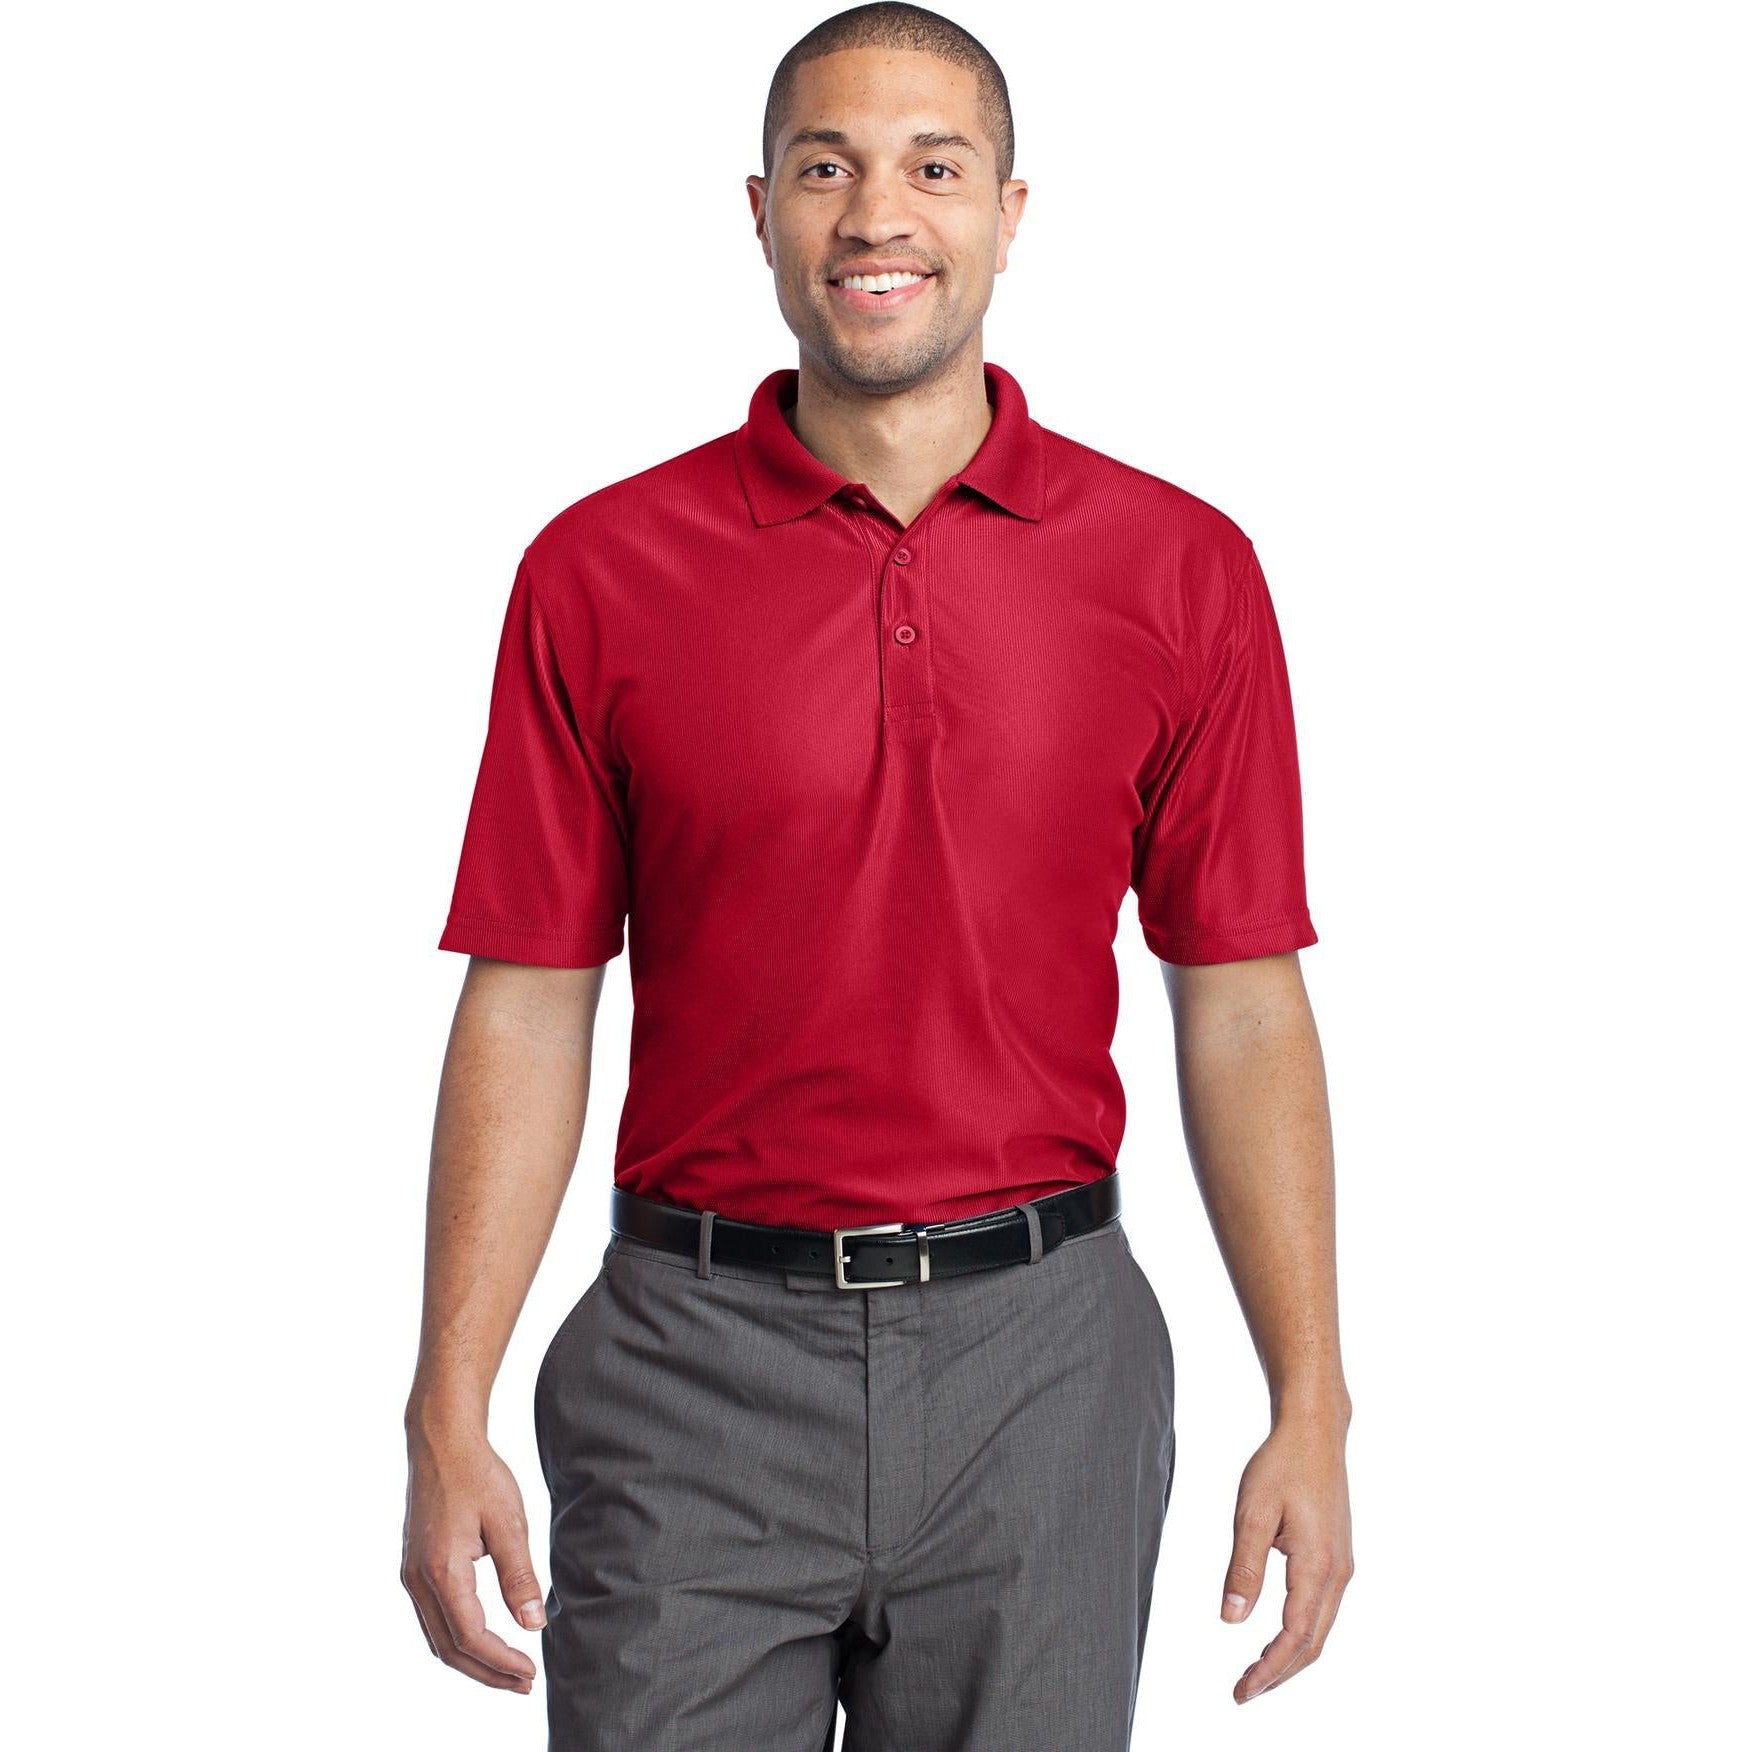 CLOSEOUT - Port Authority Performance Vertical Pique Polo